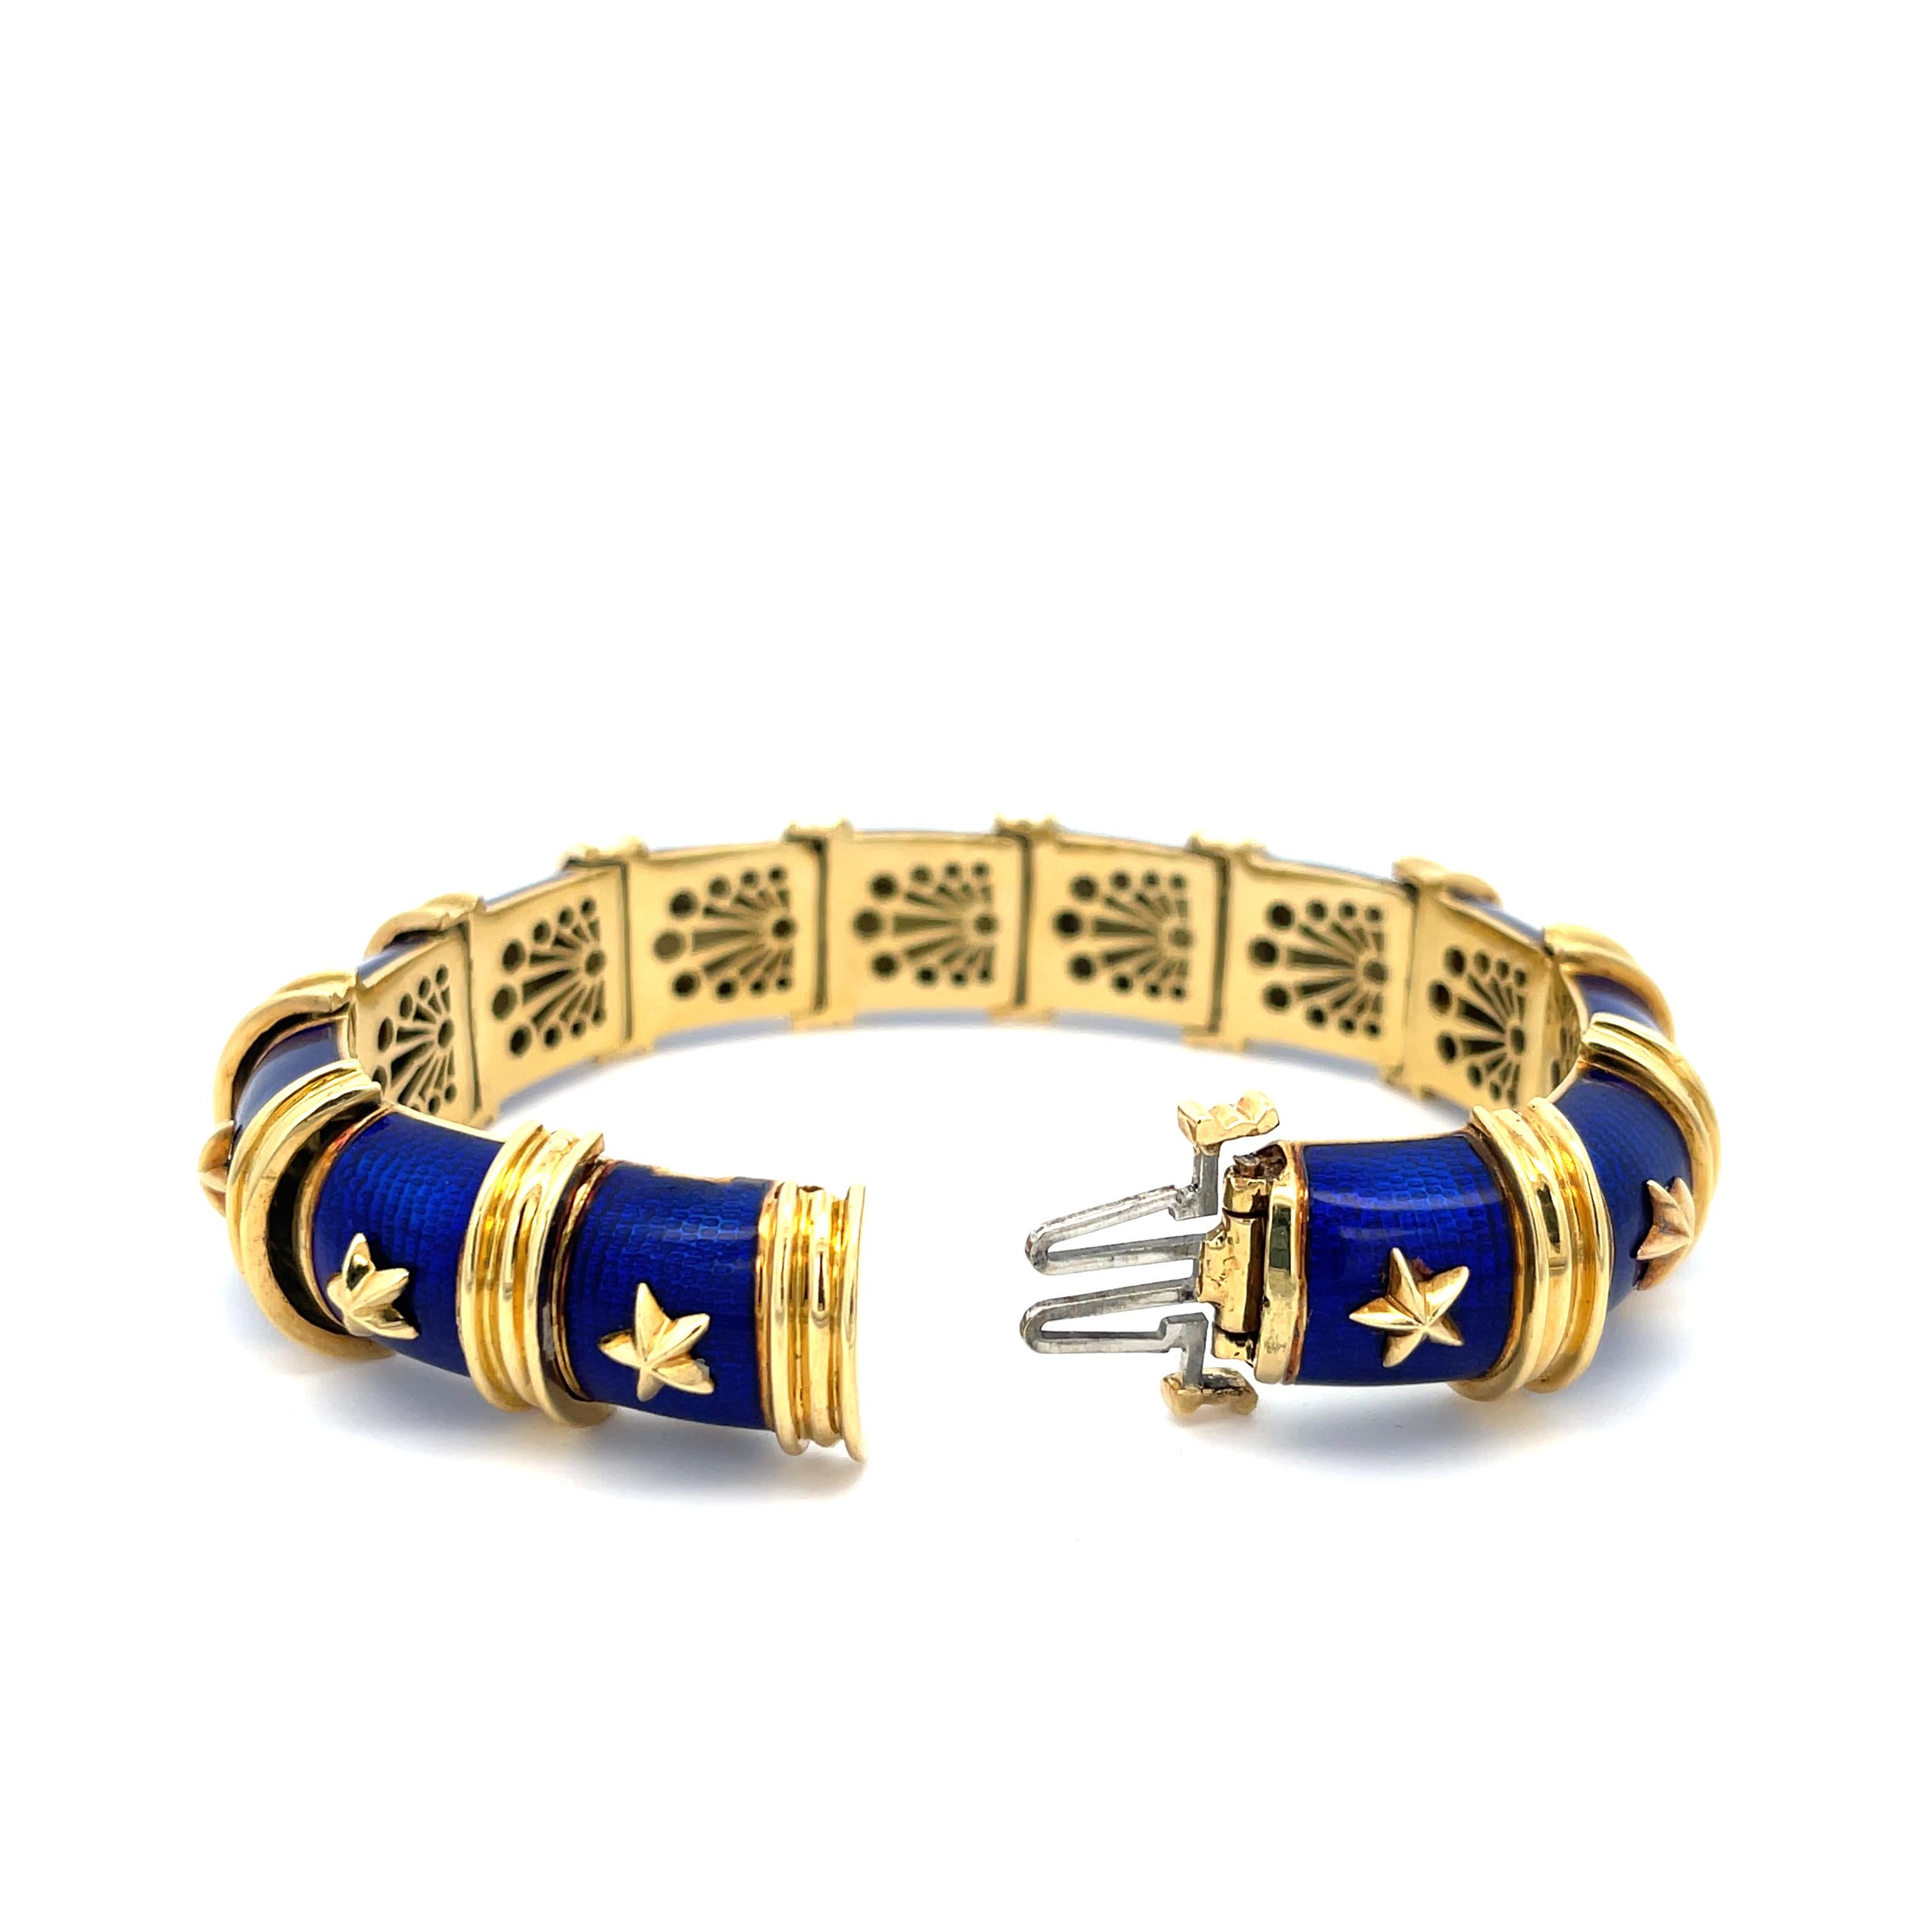 Blue Guilloche Enamel Bracelet 18K Yellow Gold In Excellent Condition For Sale In Dallas, TX